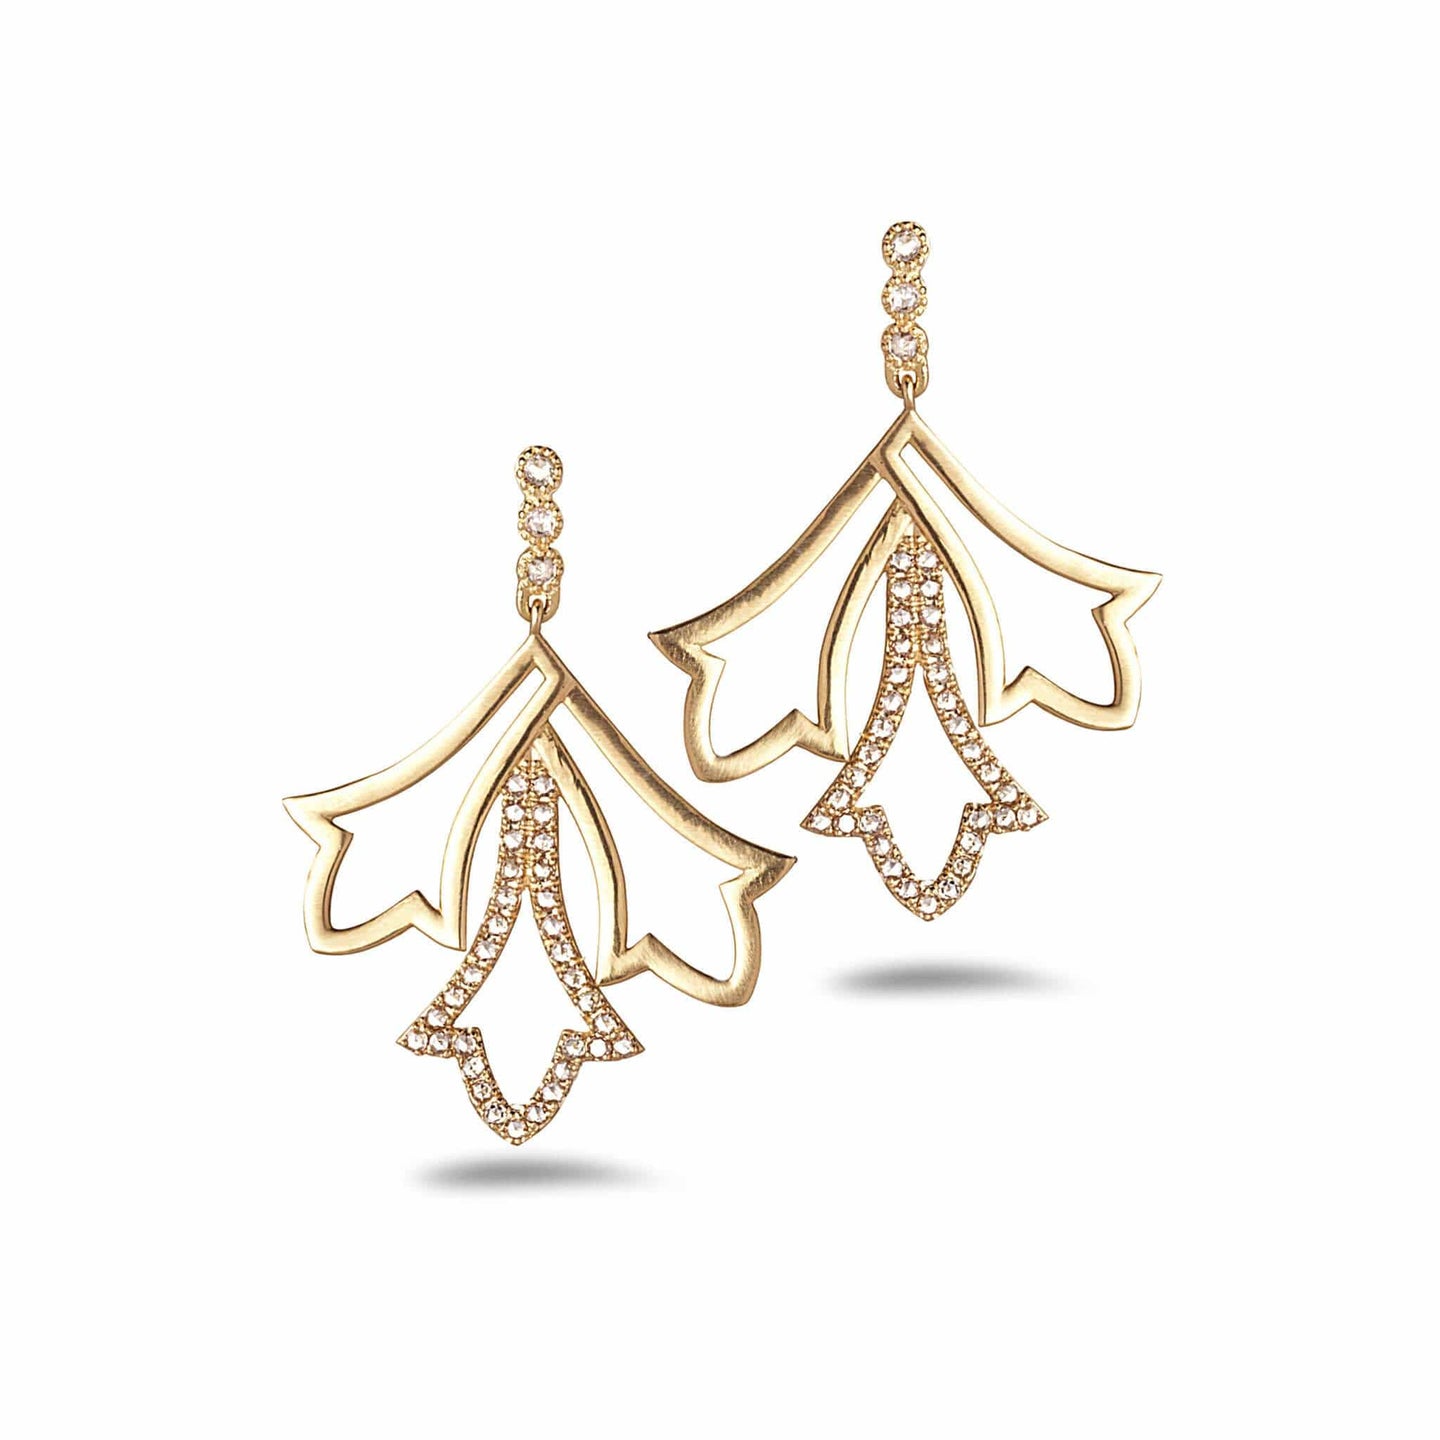 20K Small Labyrinth Drop Earrings with Diamond - Coomi